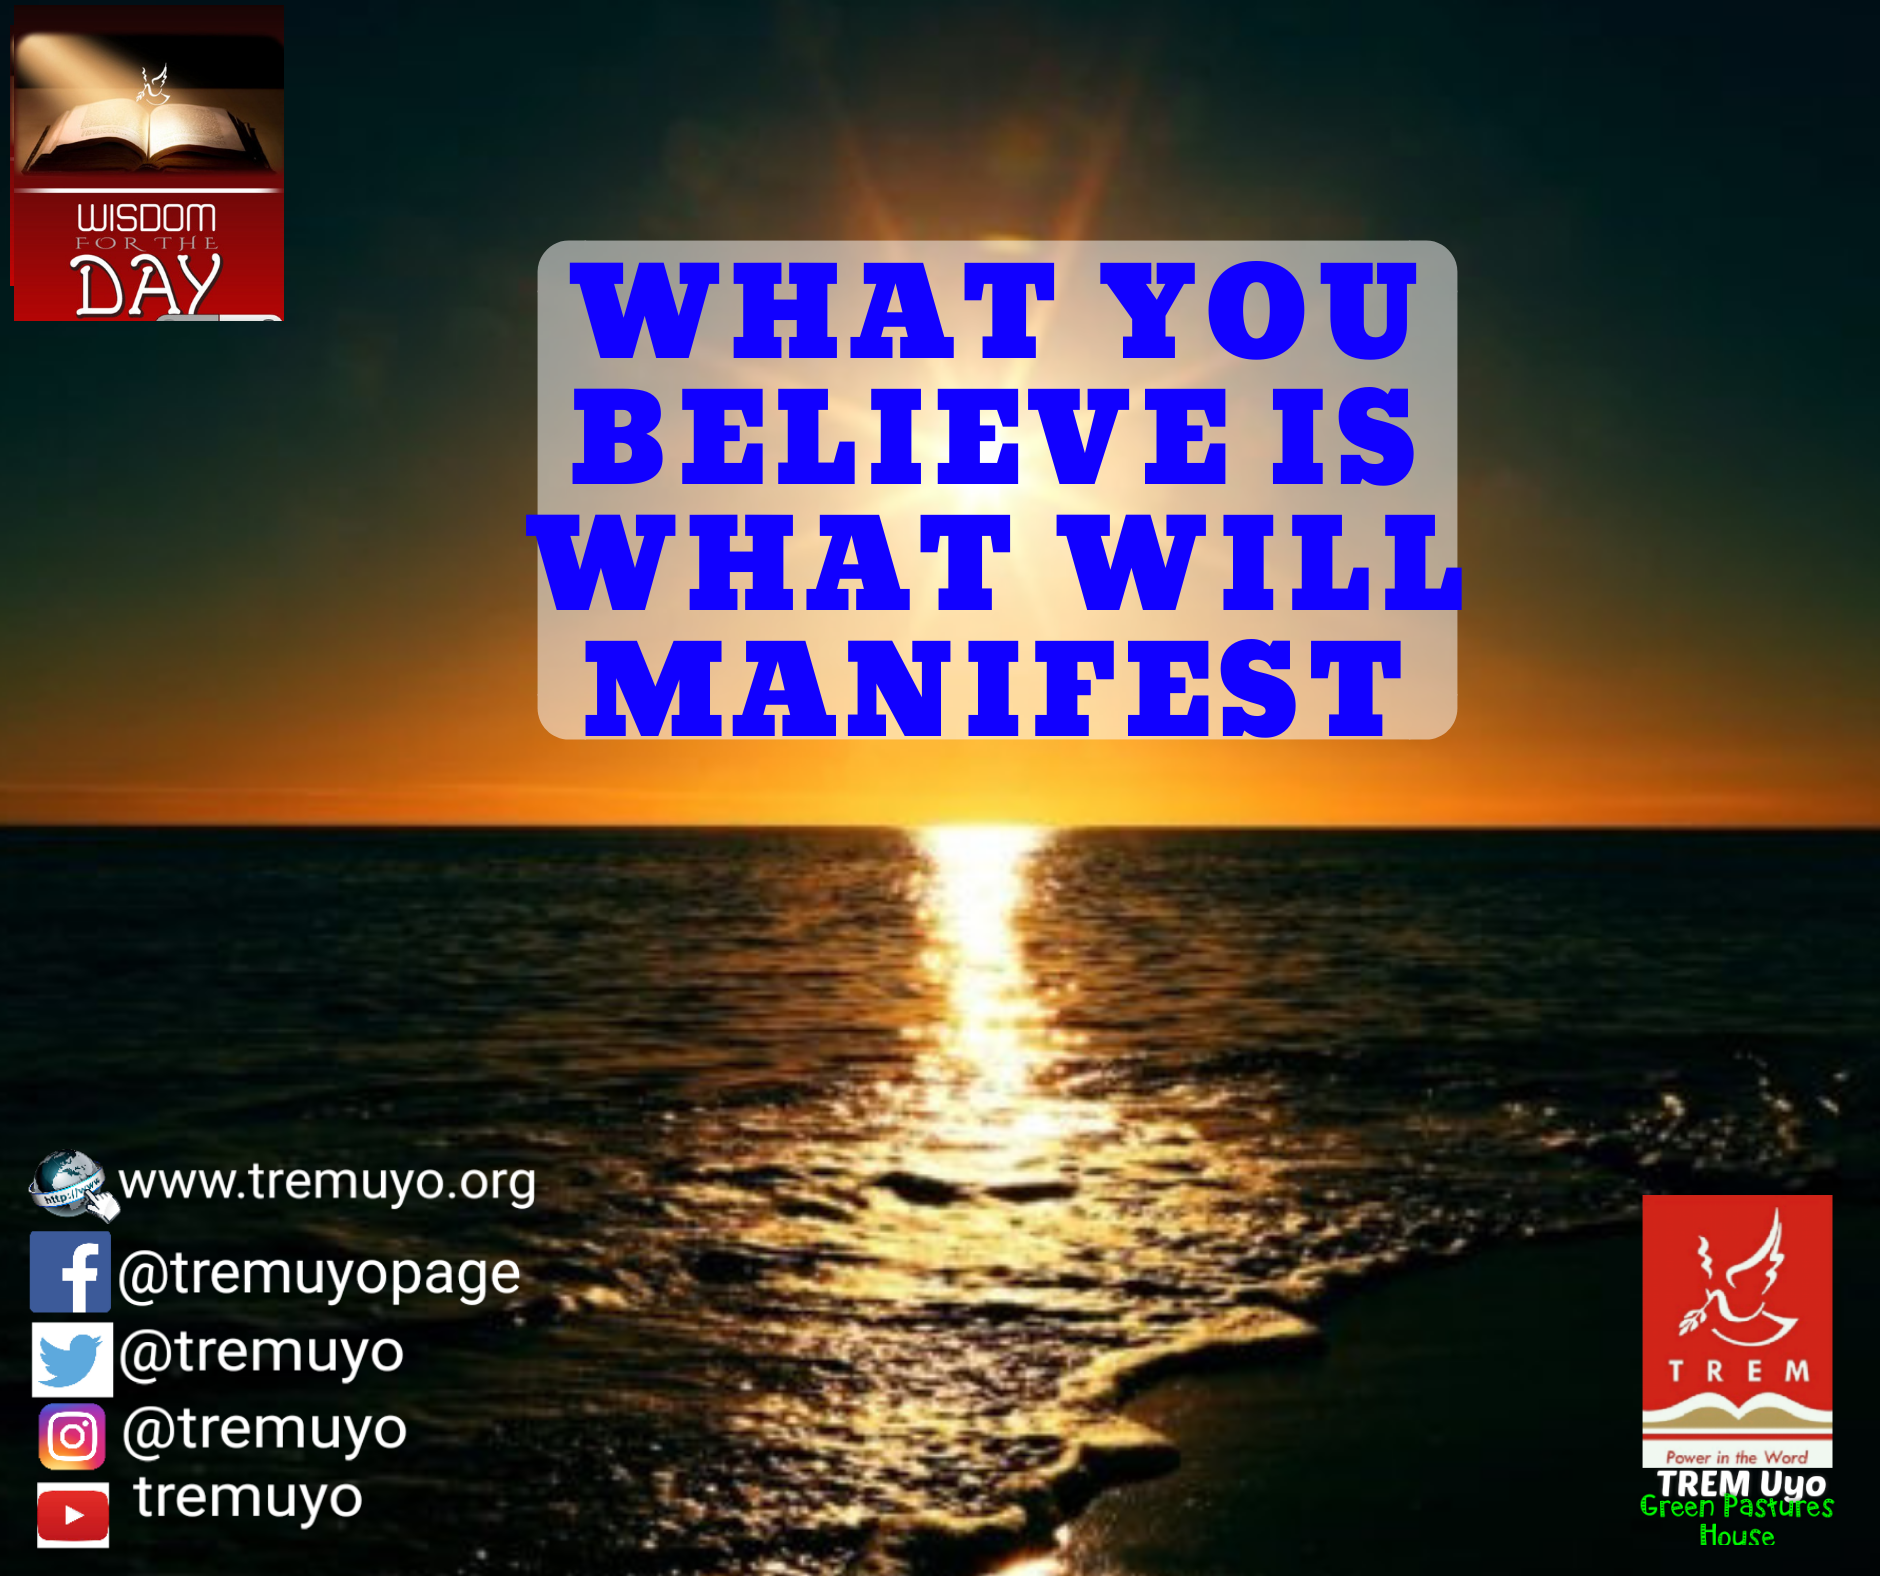 WHAT YOU BELIEVE IS WHAT WILL MANIFEST